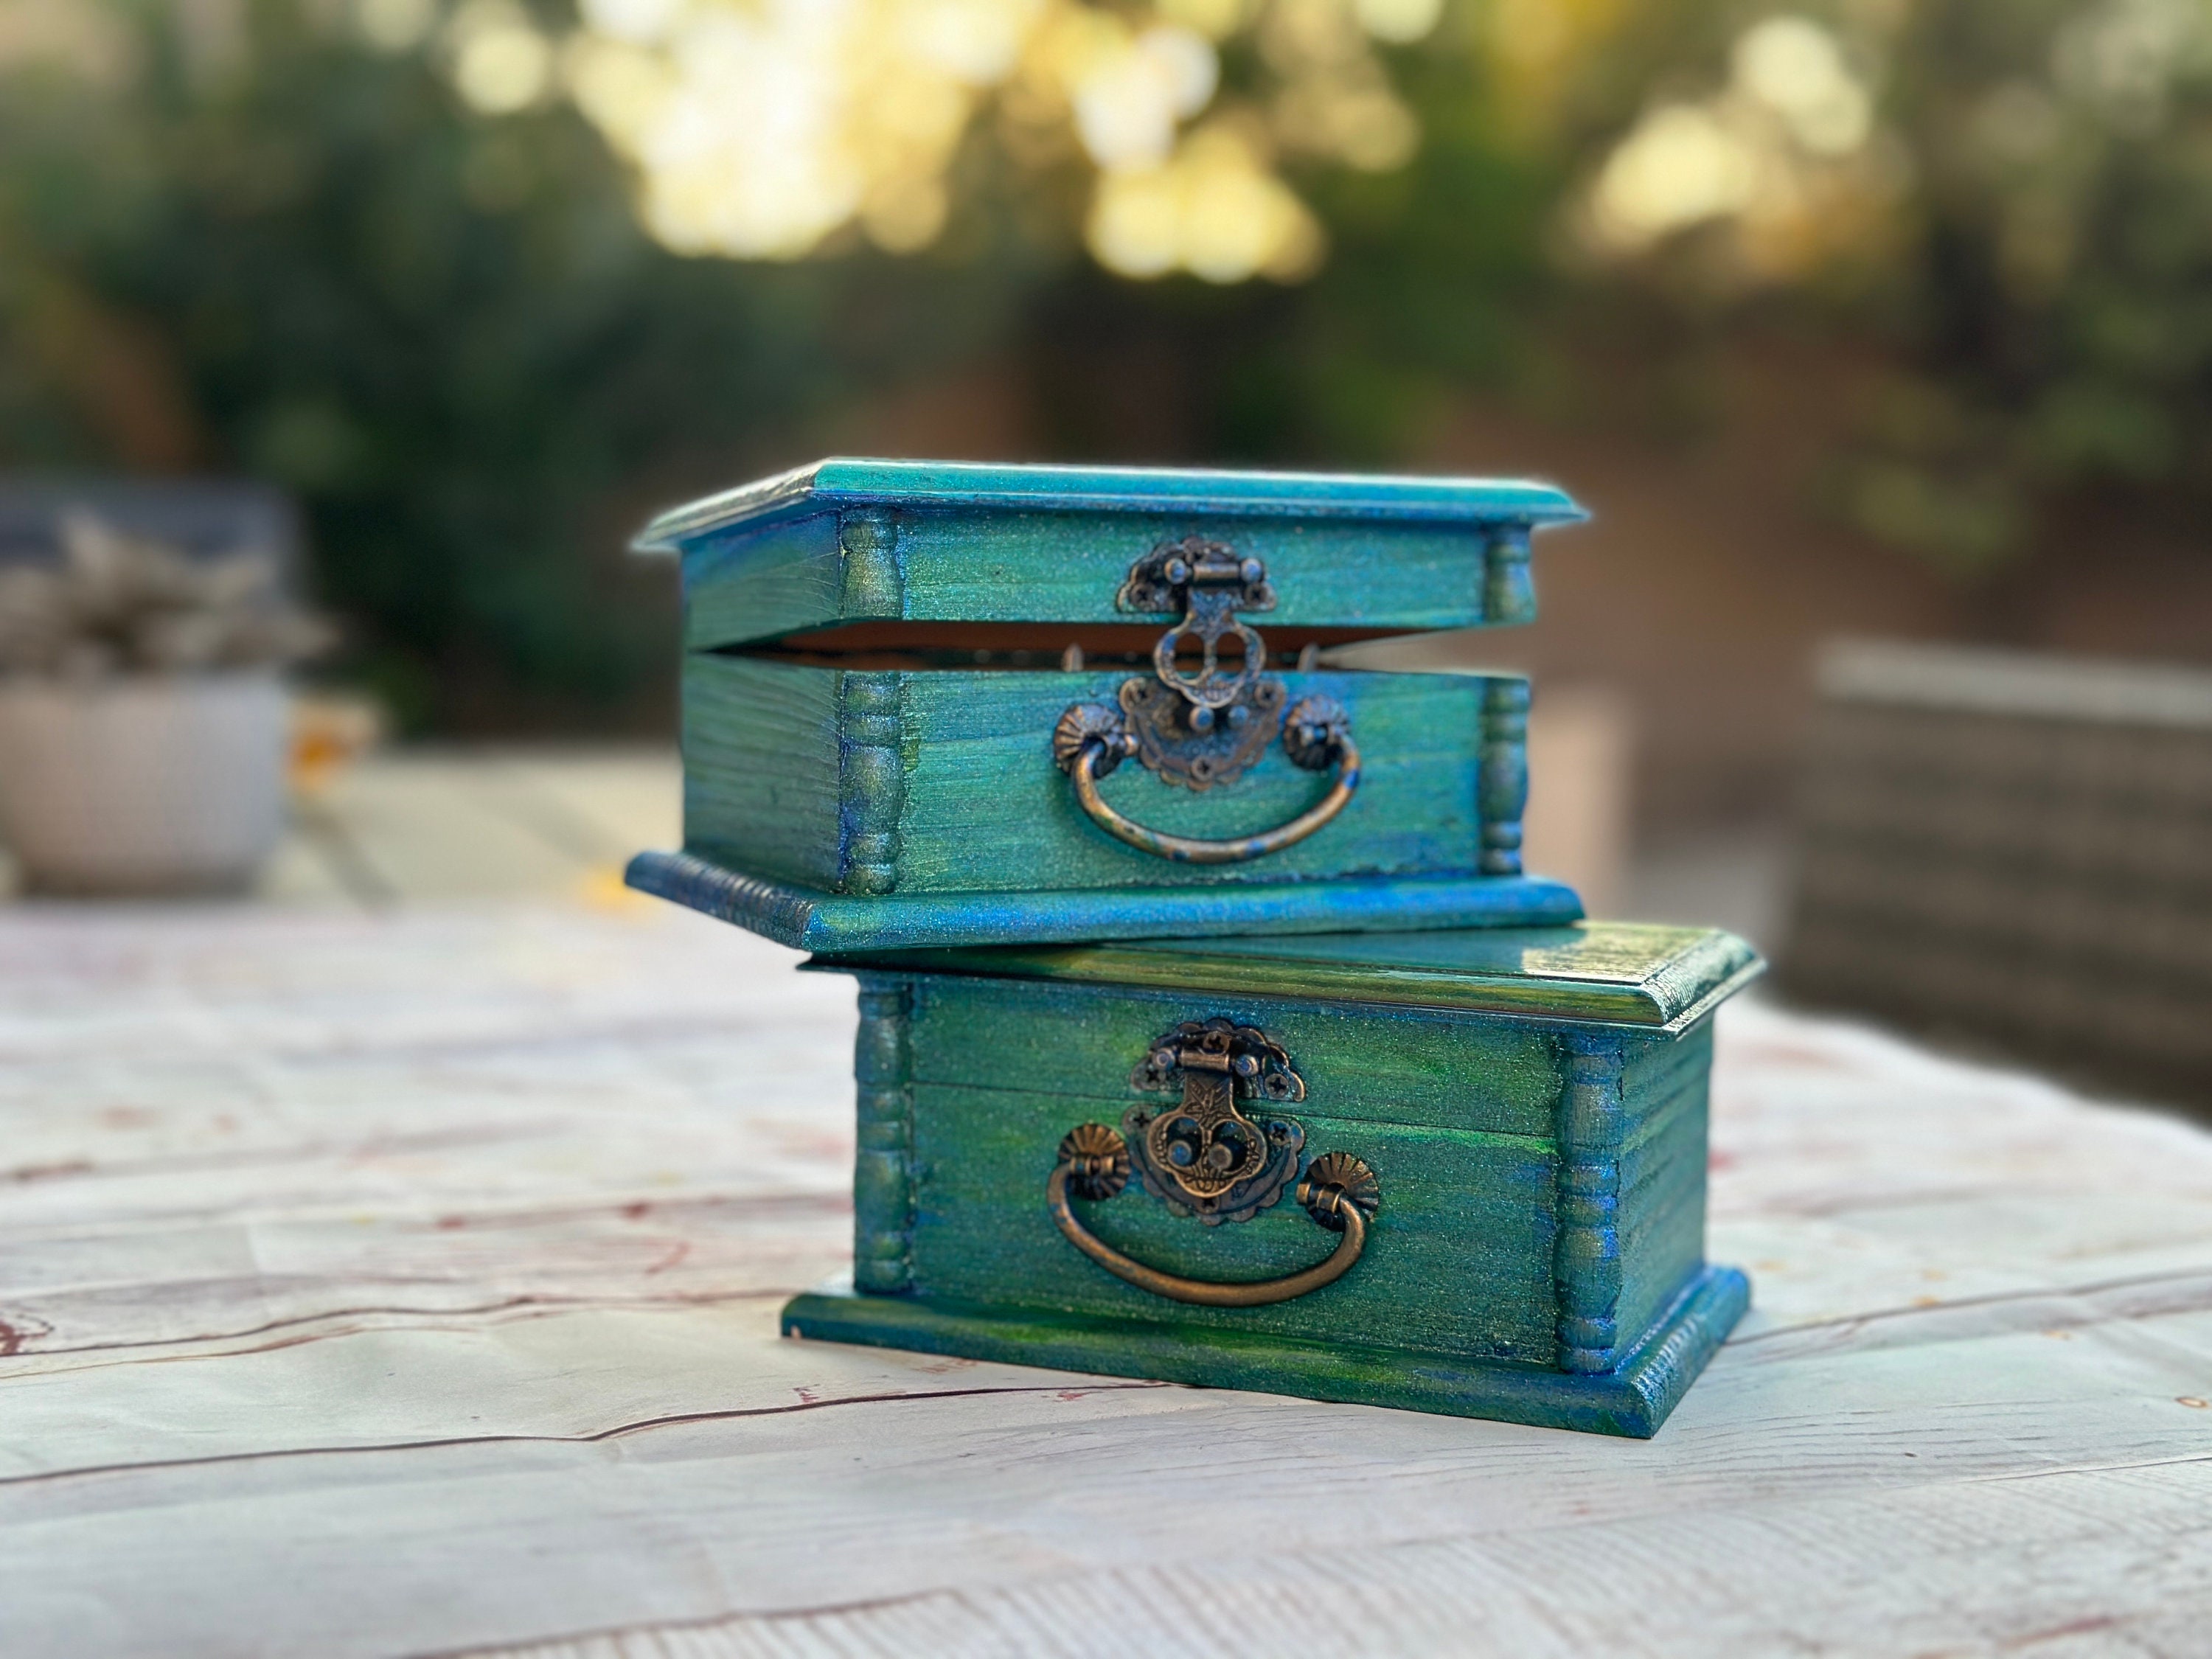 Personalized Jewelry Box Gift for Flower Girl Trinket Box Gift 